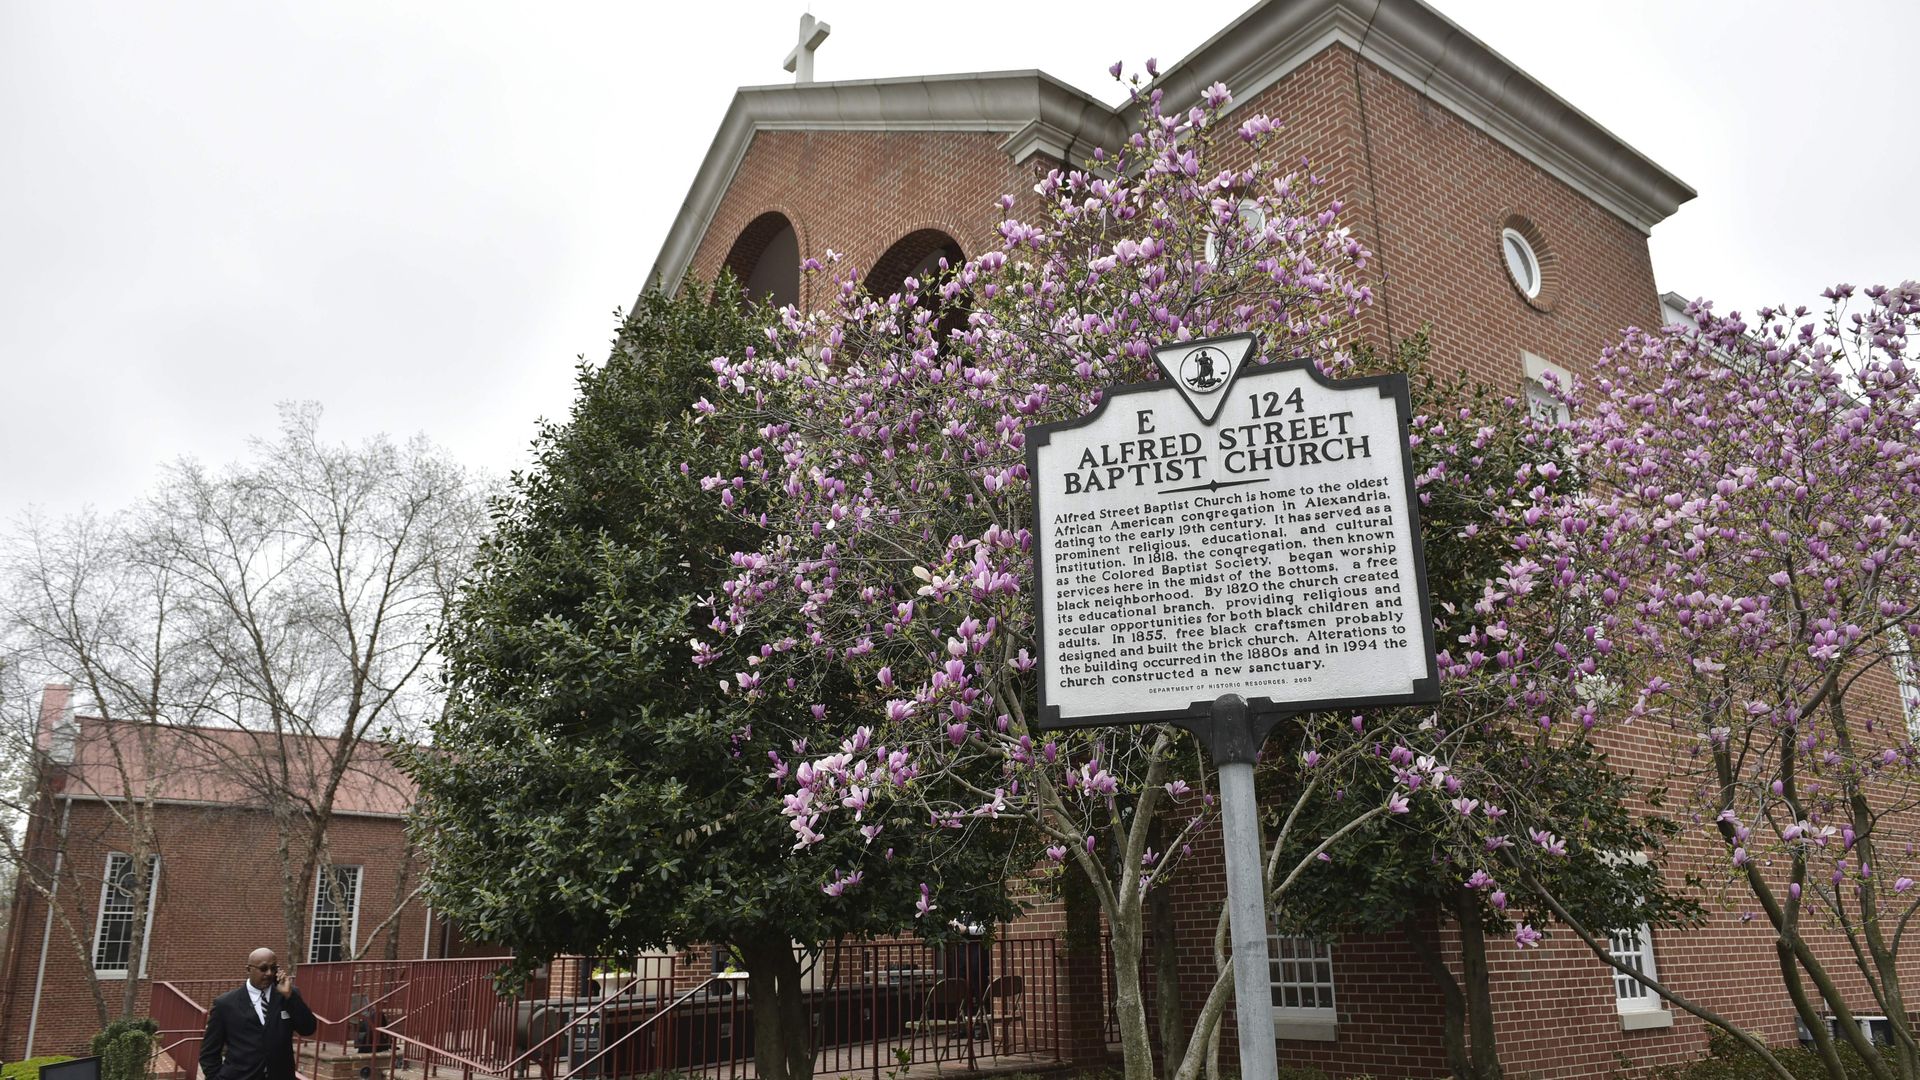 A general view shows the Alfred Street Baptist Church where US President Barack Obama and family are attending Easter Service on March 27, 2016 in Alexandria, Virginia.